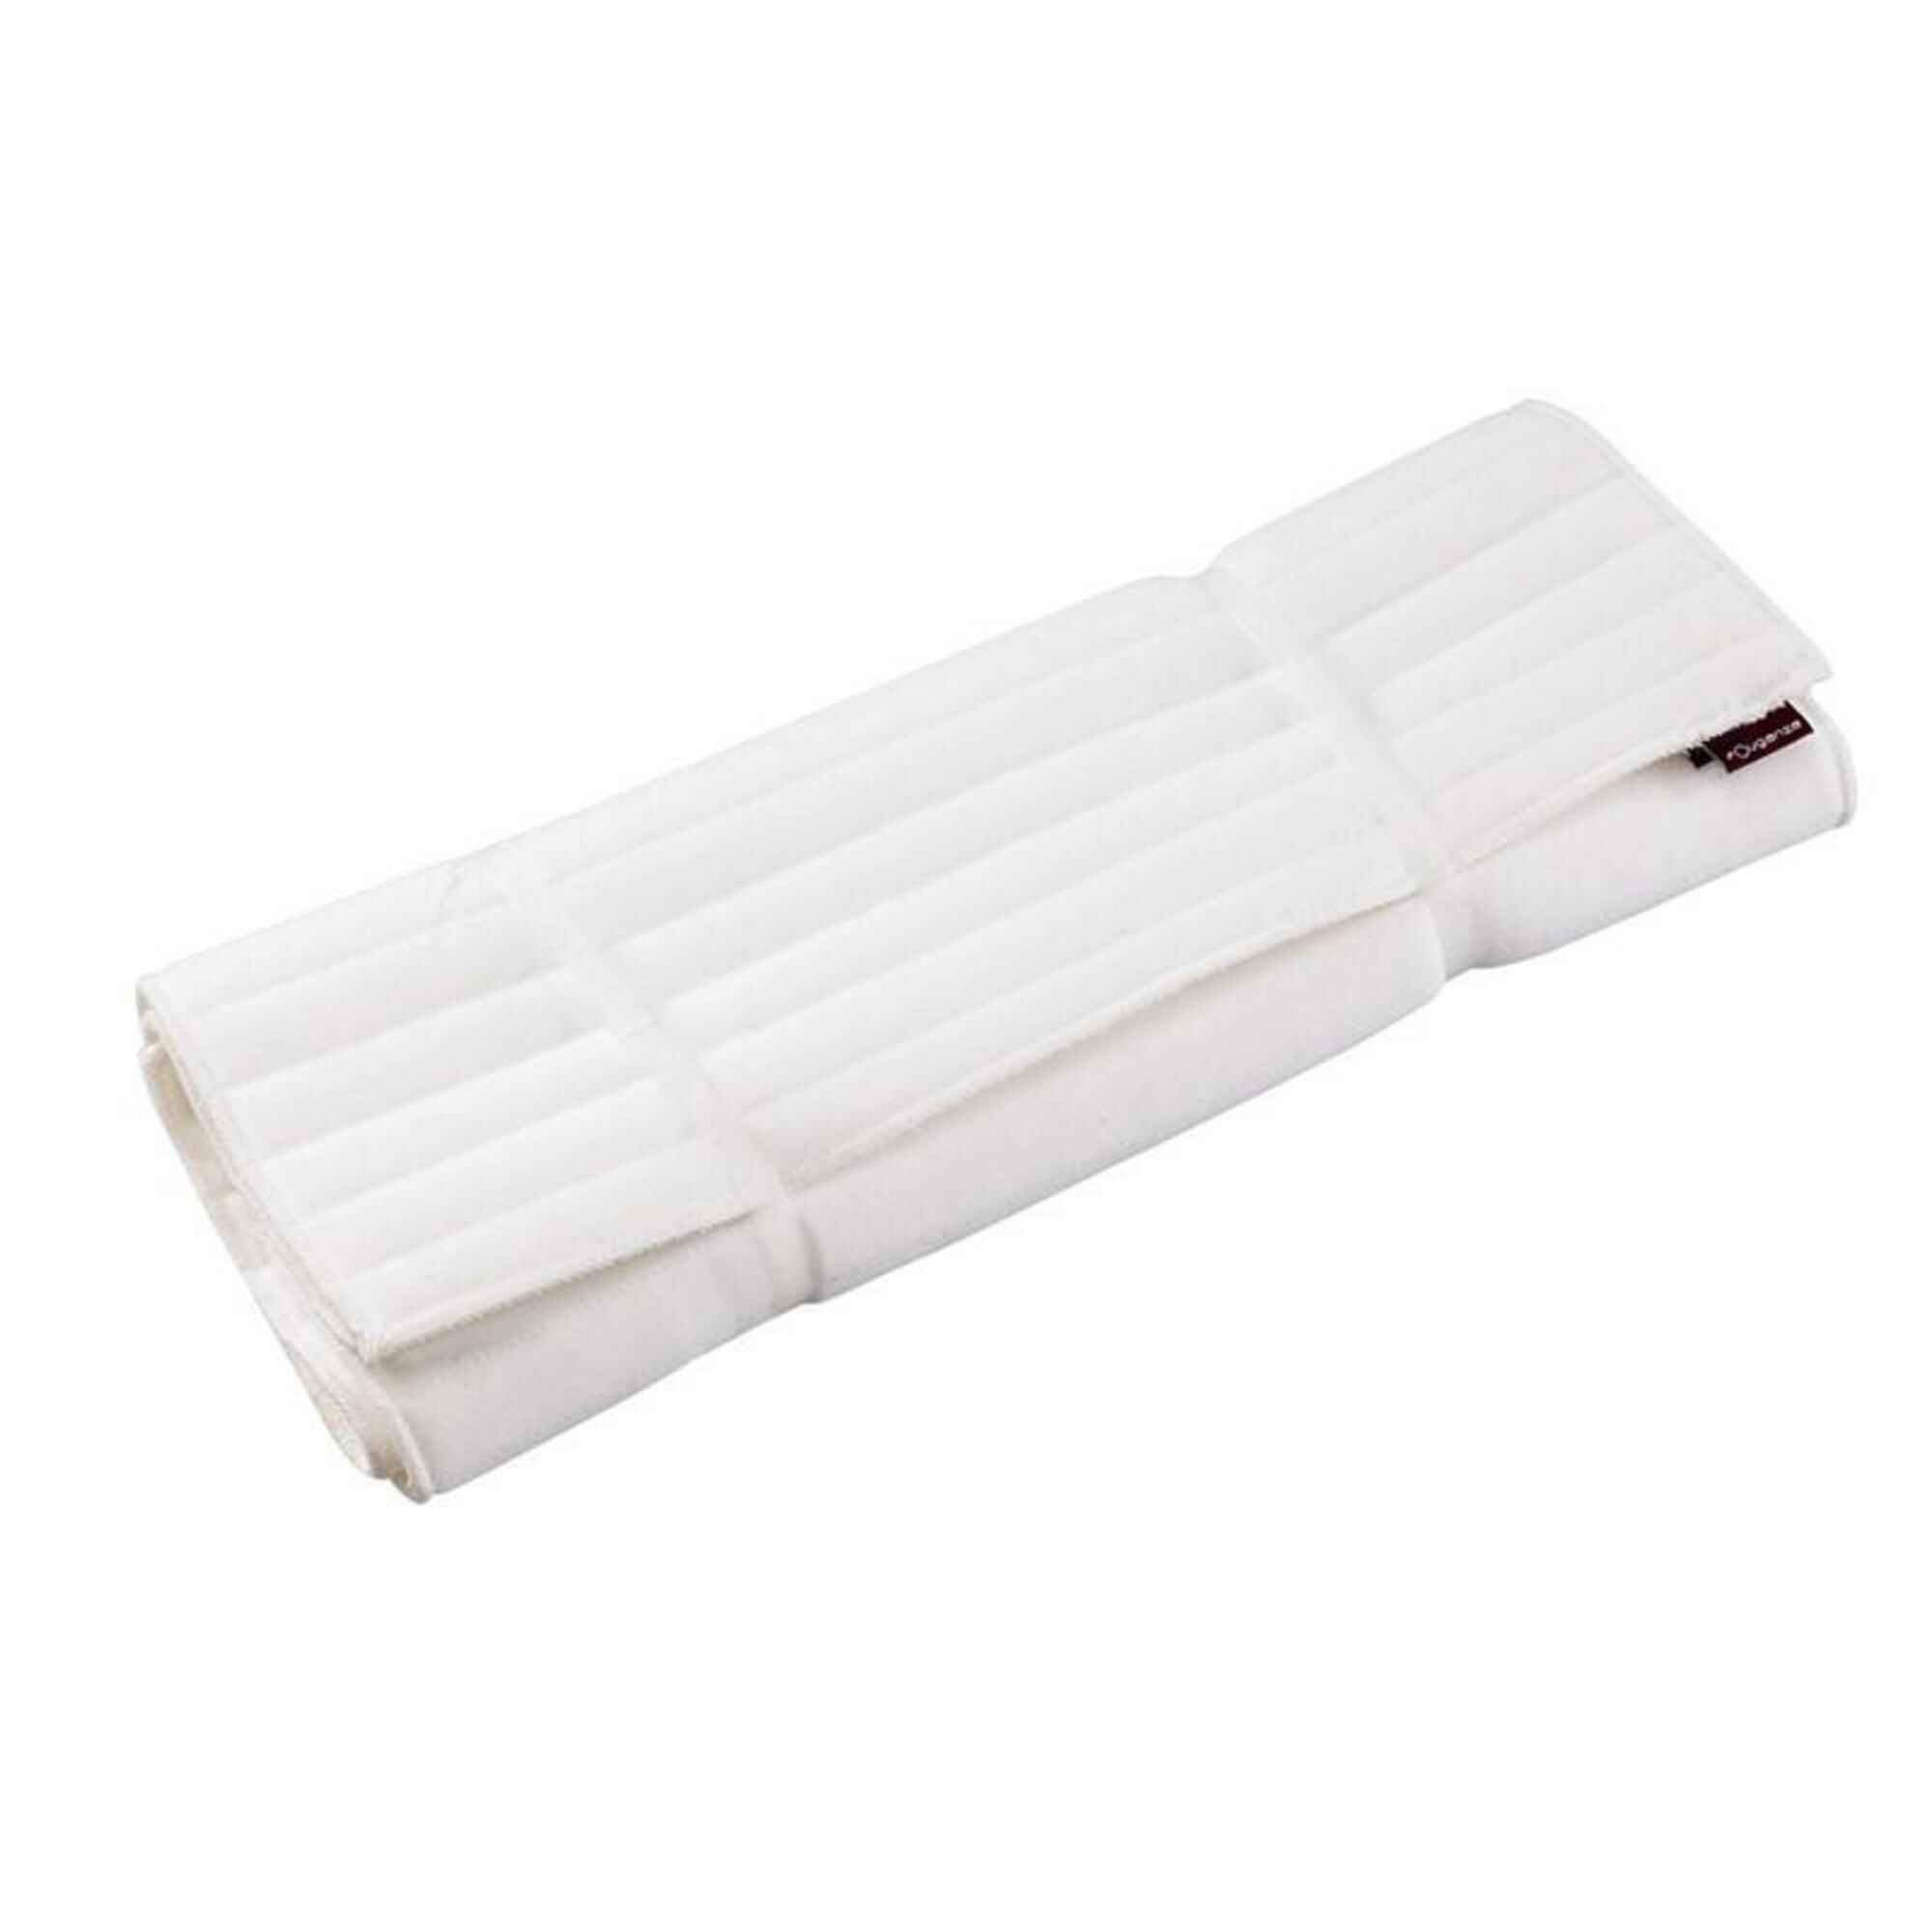 Horse Riding Large Wraps Twin-Pack - White